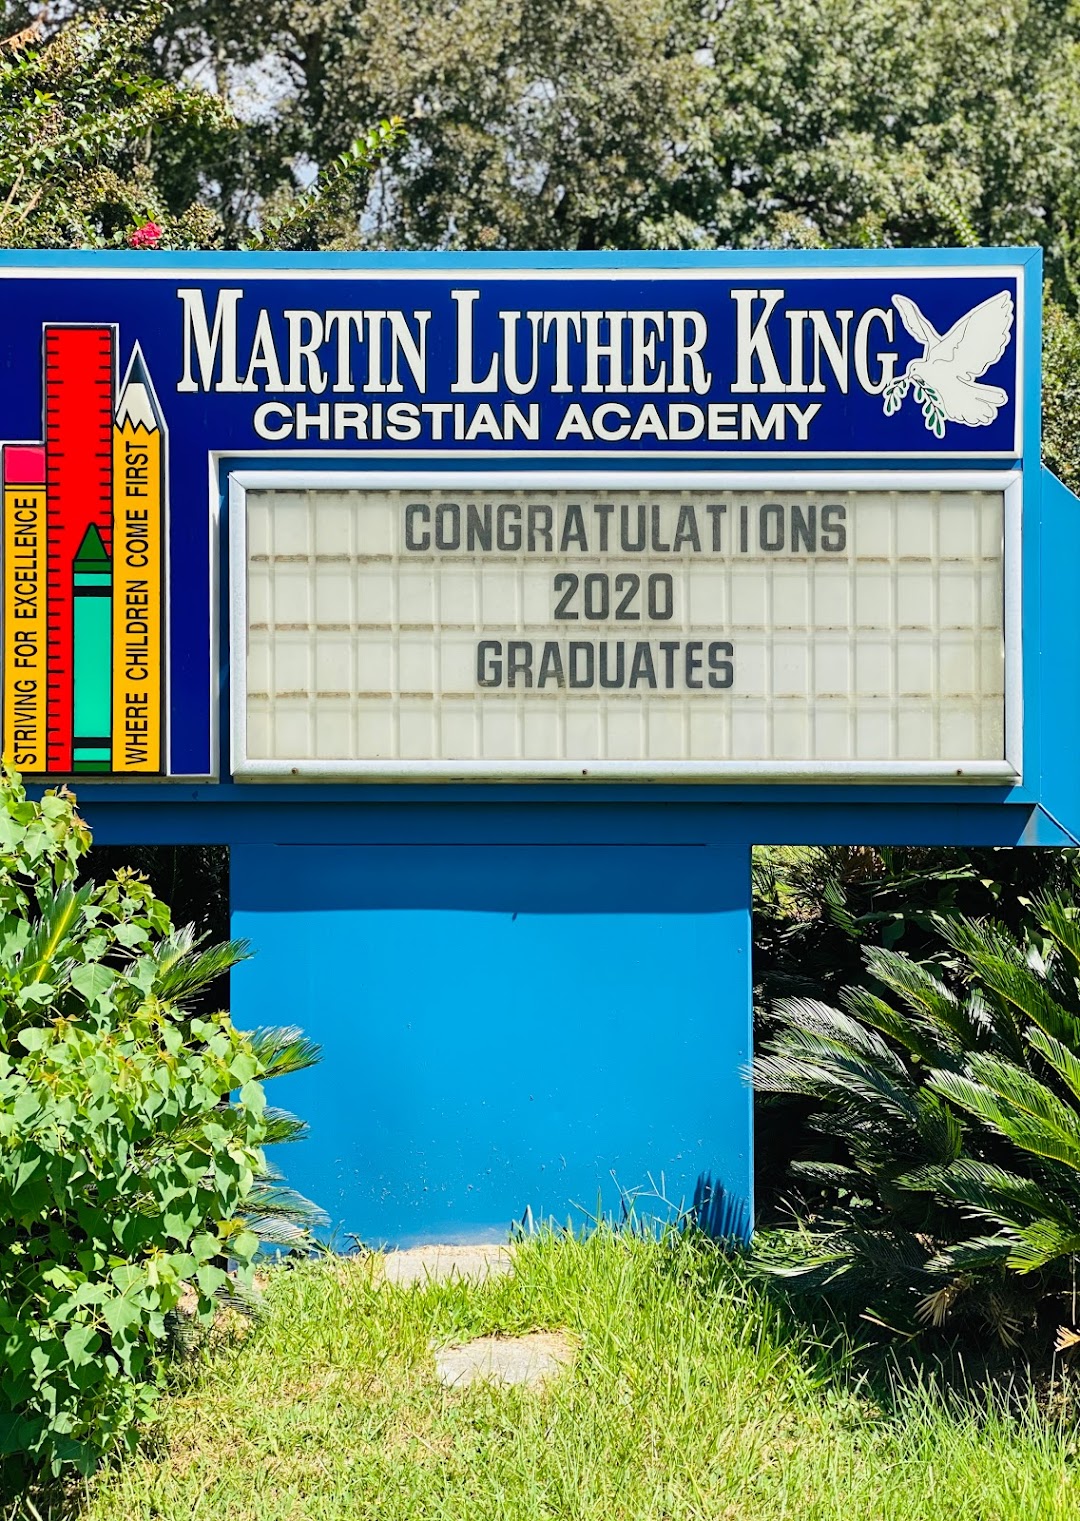 Martin Luther King Jr. Christian Academy of Baton Rouge